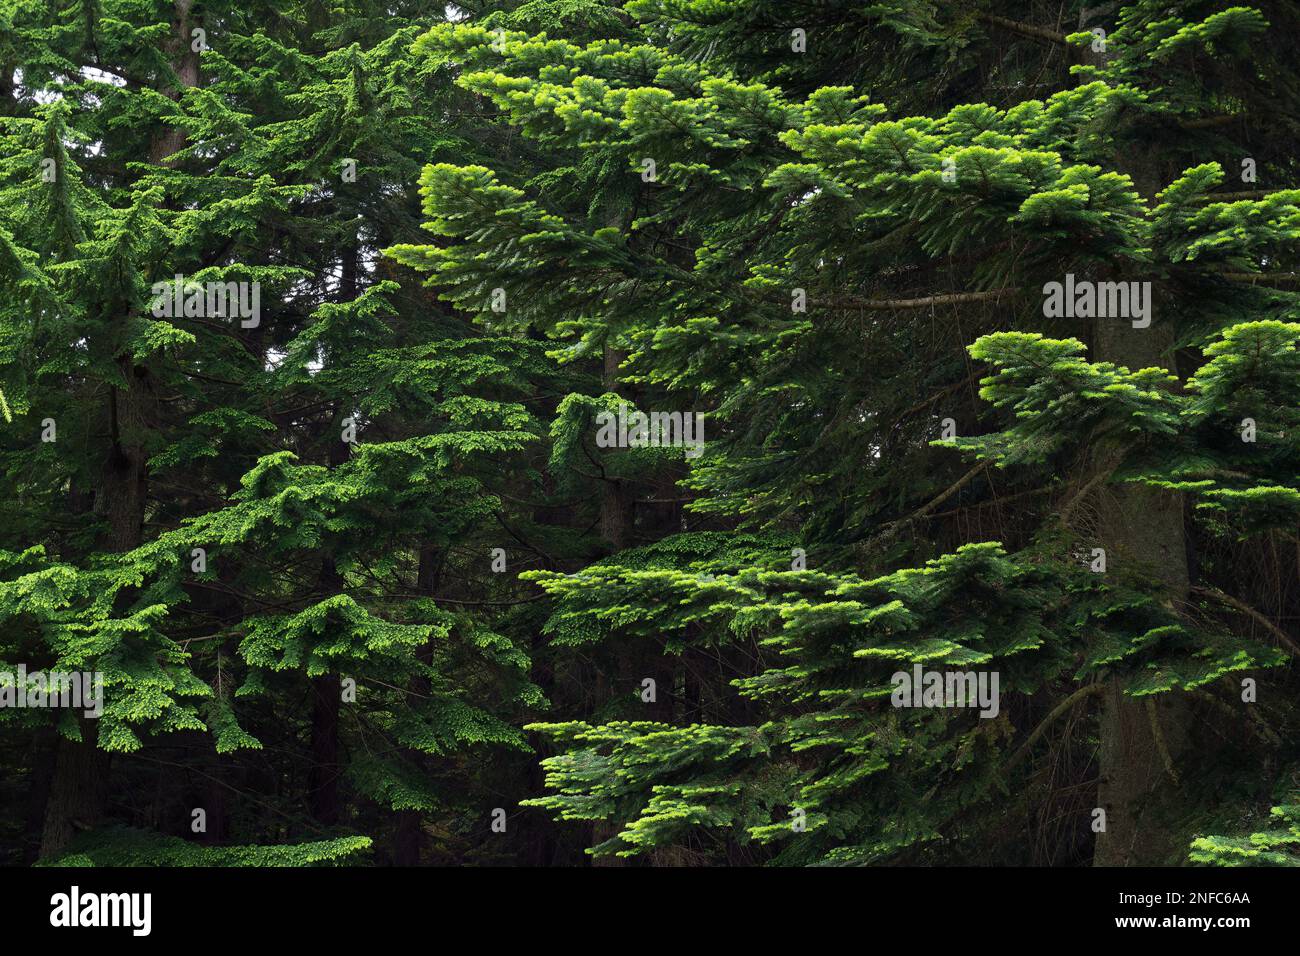 Lush green branches of Pacific silver fir (Abies amabilis) in the right and Western hemlock (Tsuga heterophylla) in the left. Stock Photo